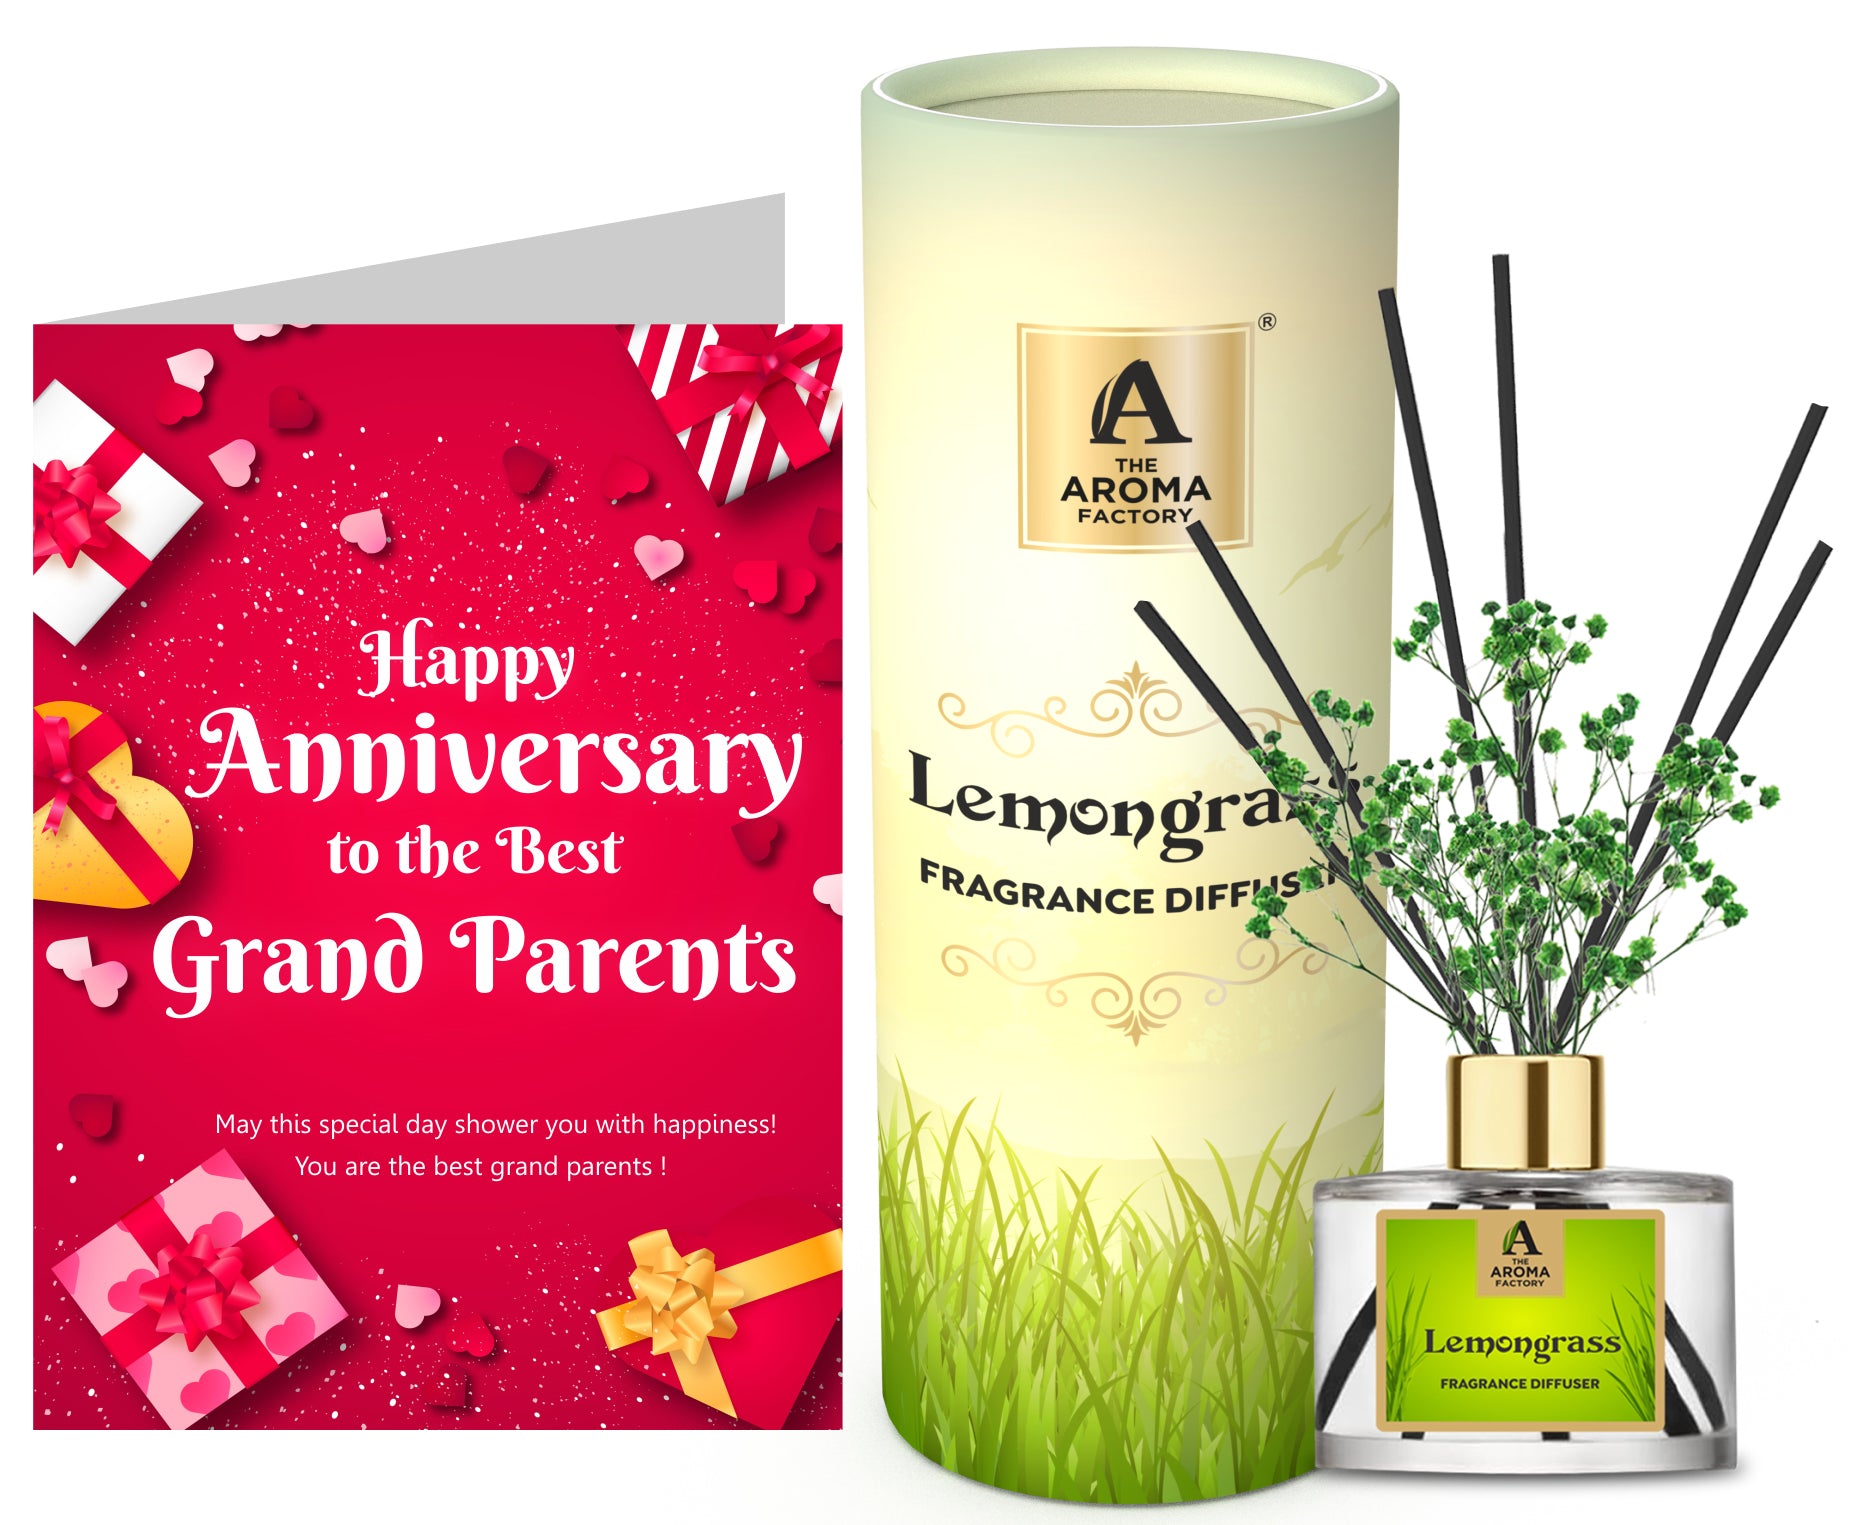 The Aroma Factory Happy Anniversary Dada Dadi Grand Parents Gift with Card, Lemongrass Fragrance Reed Diffuser Set (1 Box + 1 Card)